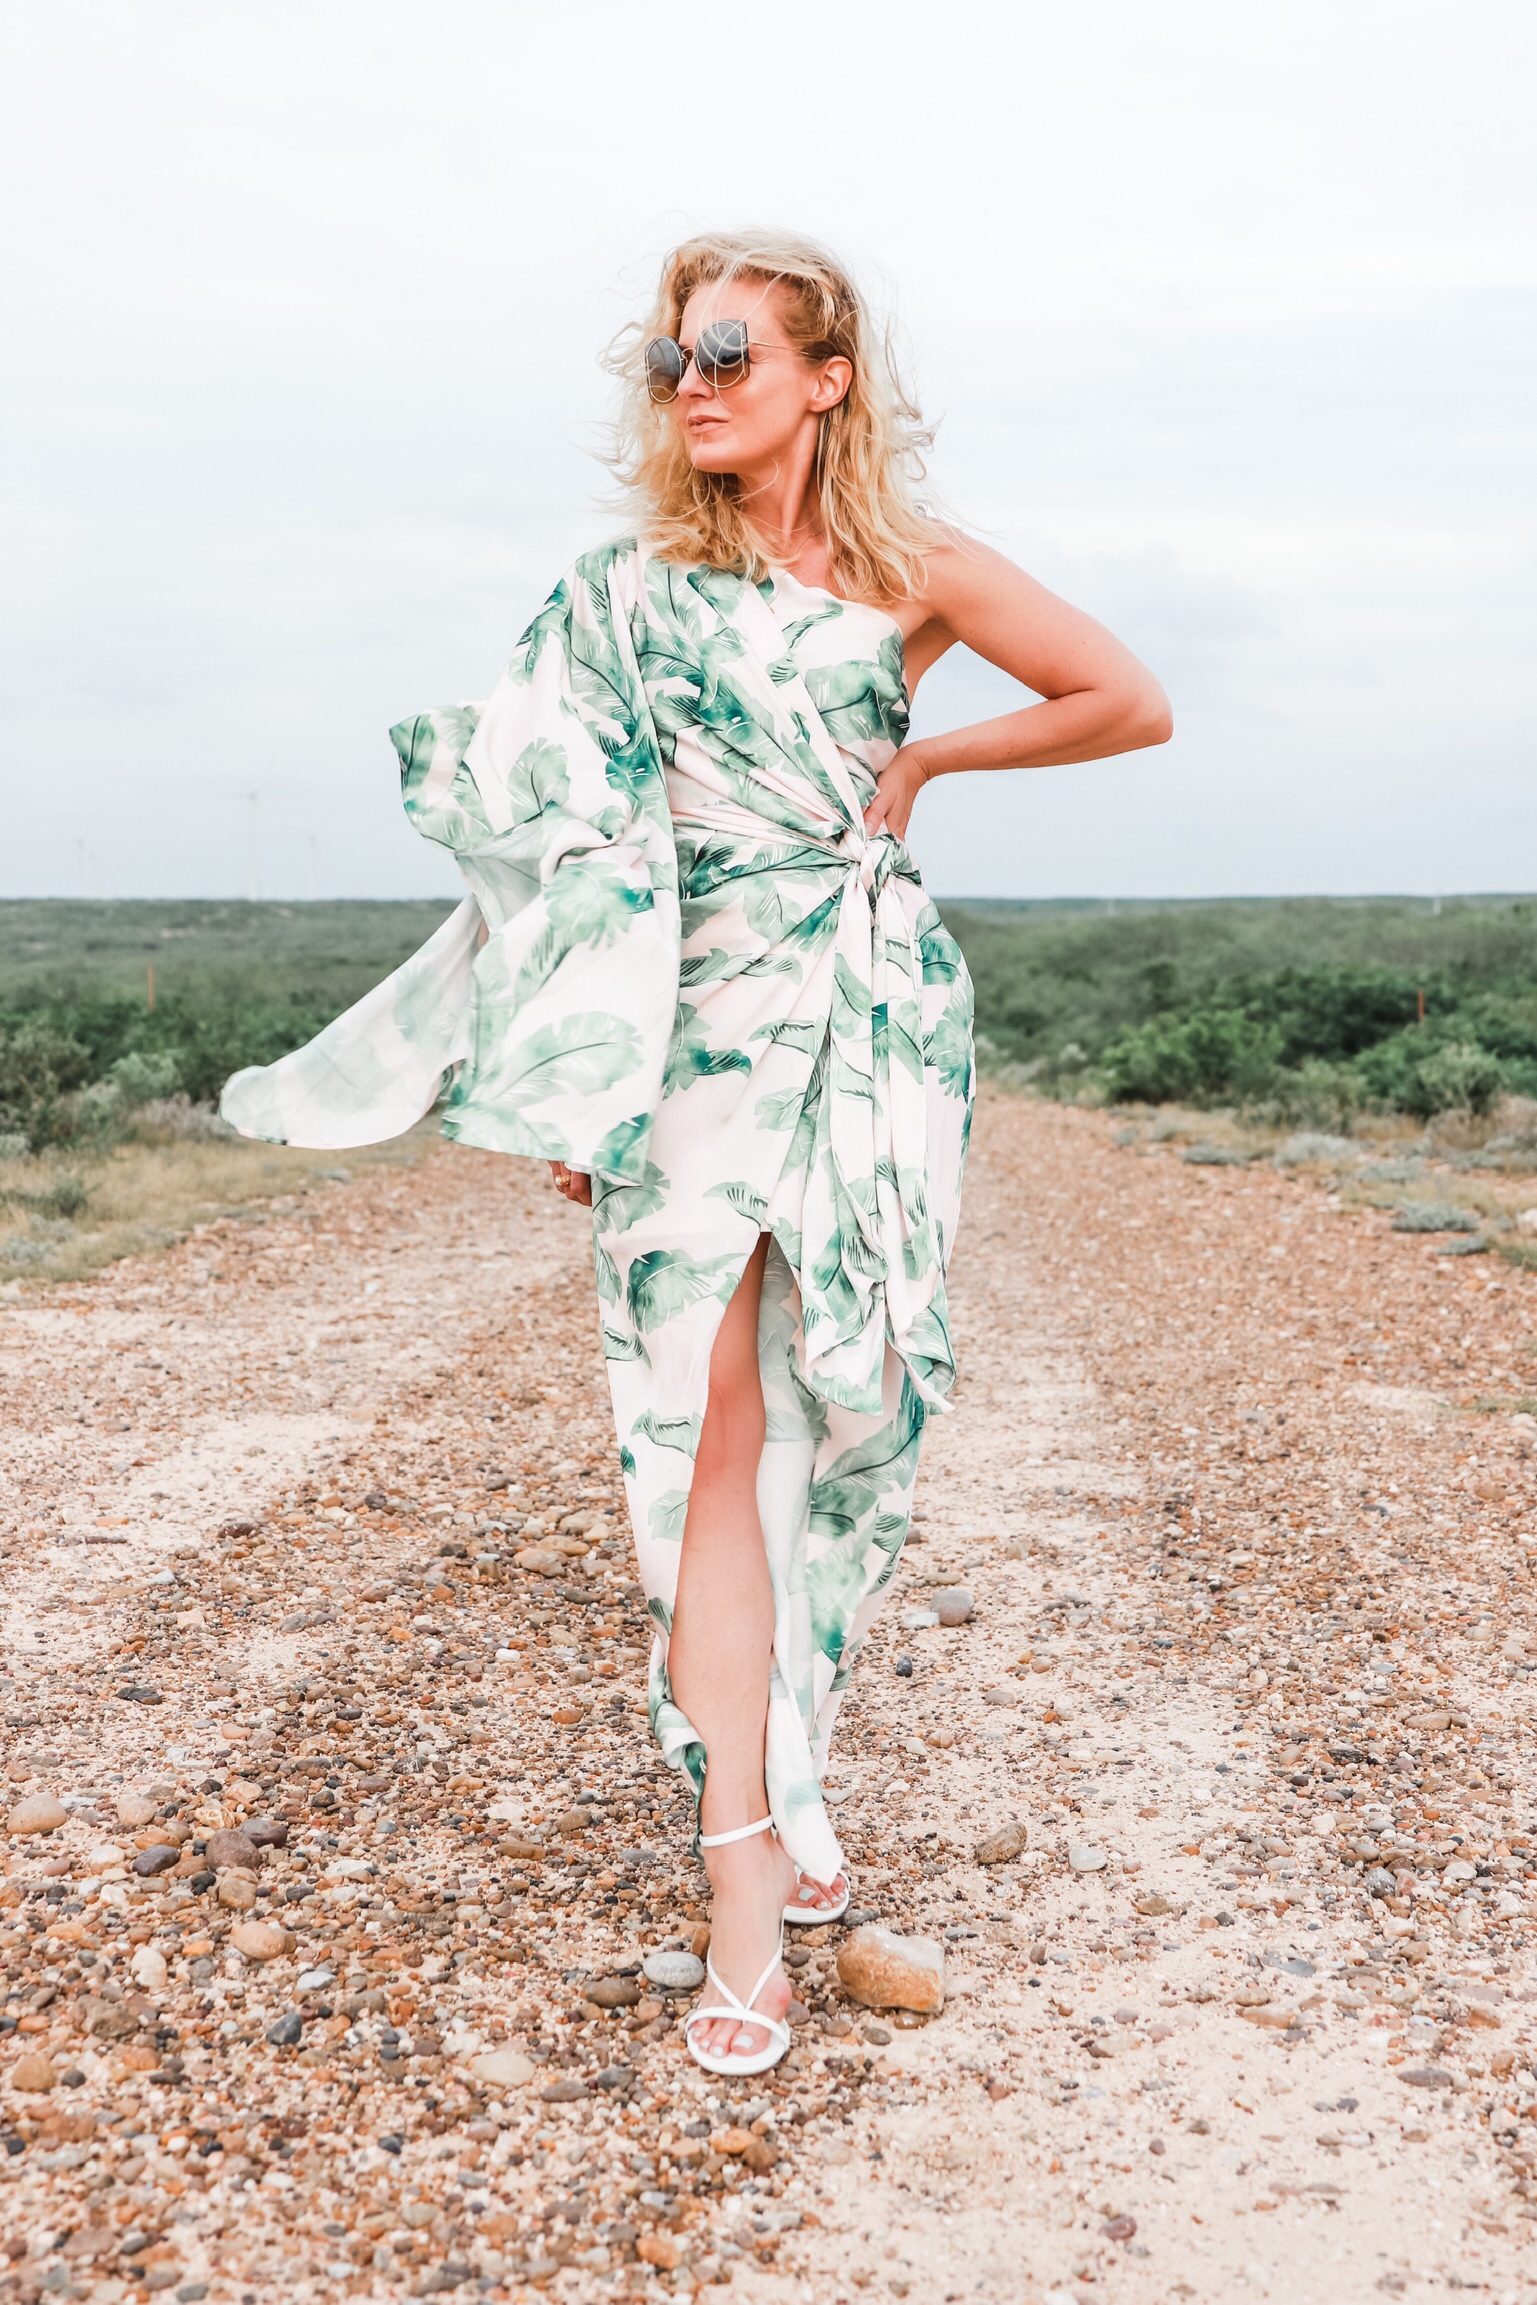 Top 10 Boho Dresses Trends for Summer 2020 - ChicBohoStyle – Chic Boho Style